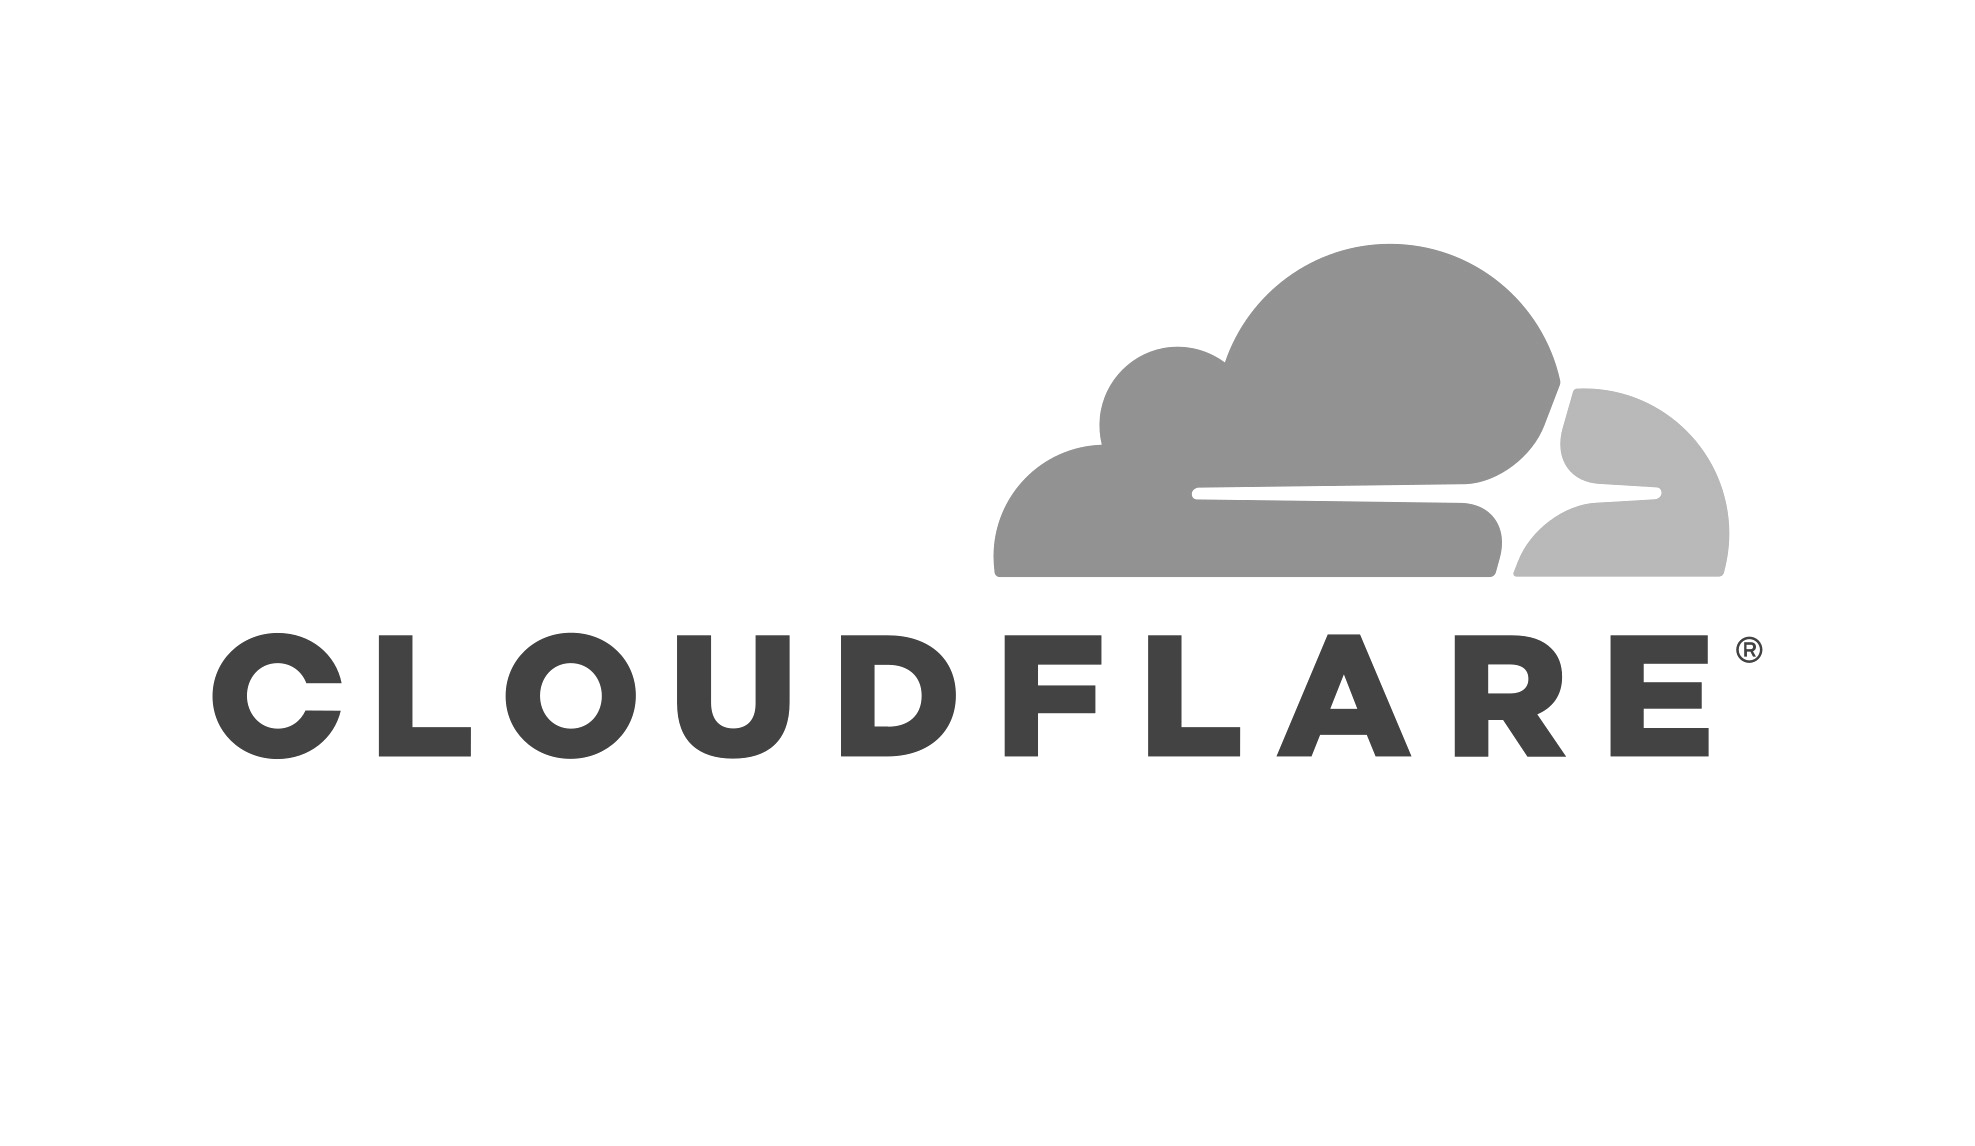 cloudflare-logo-edited.png